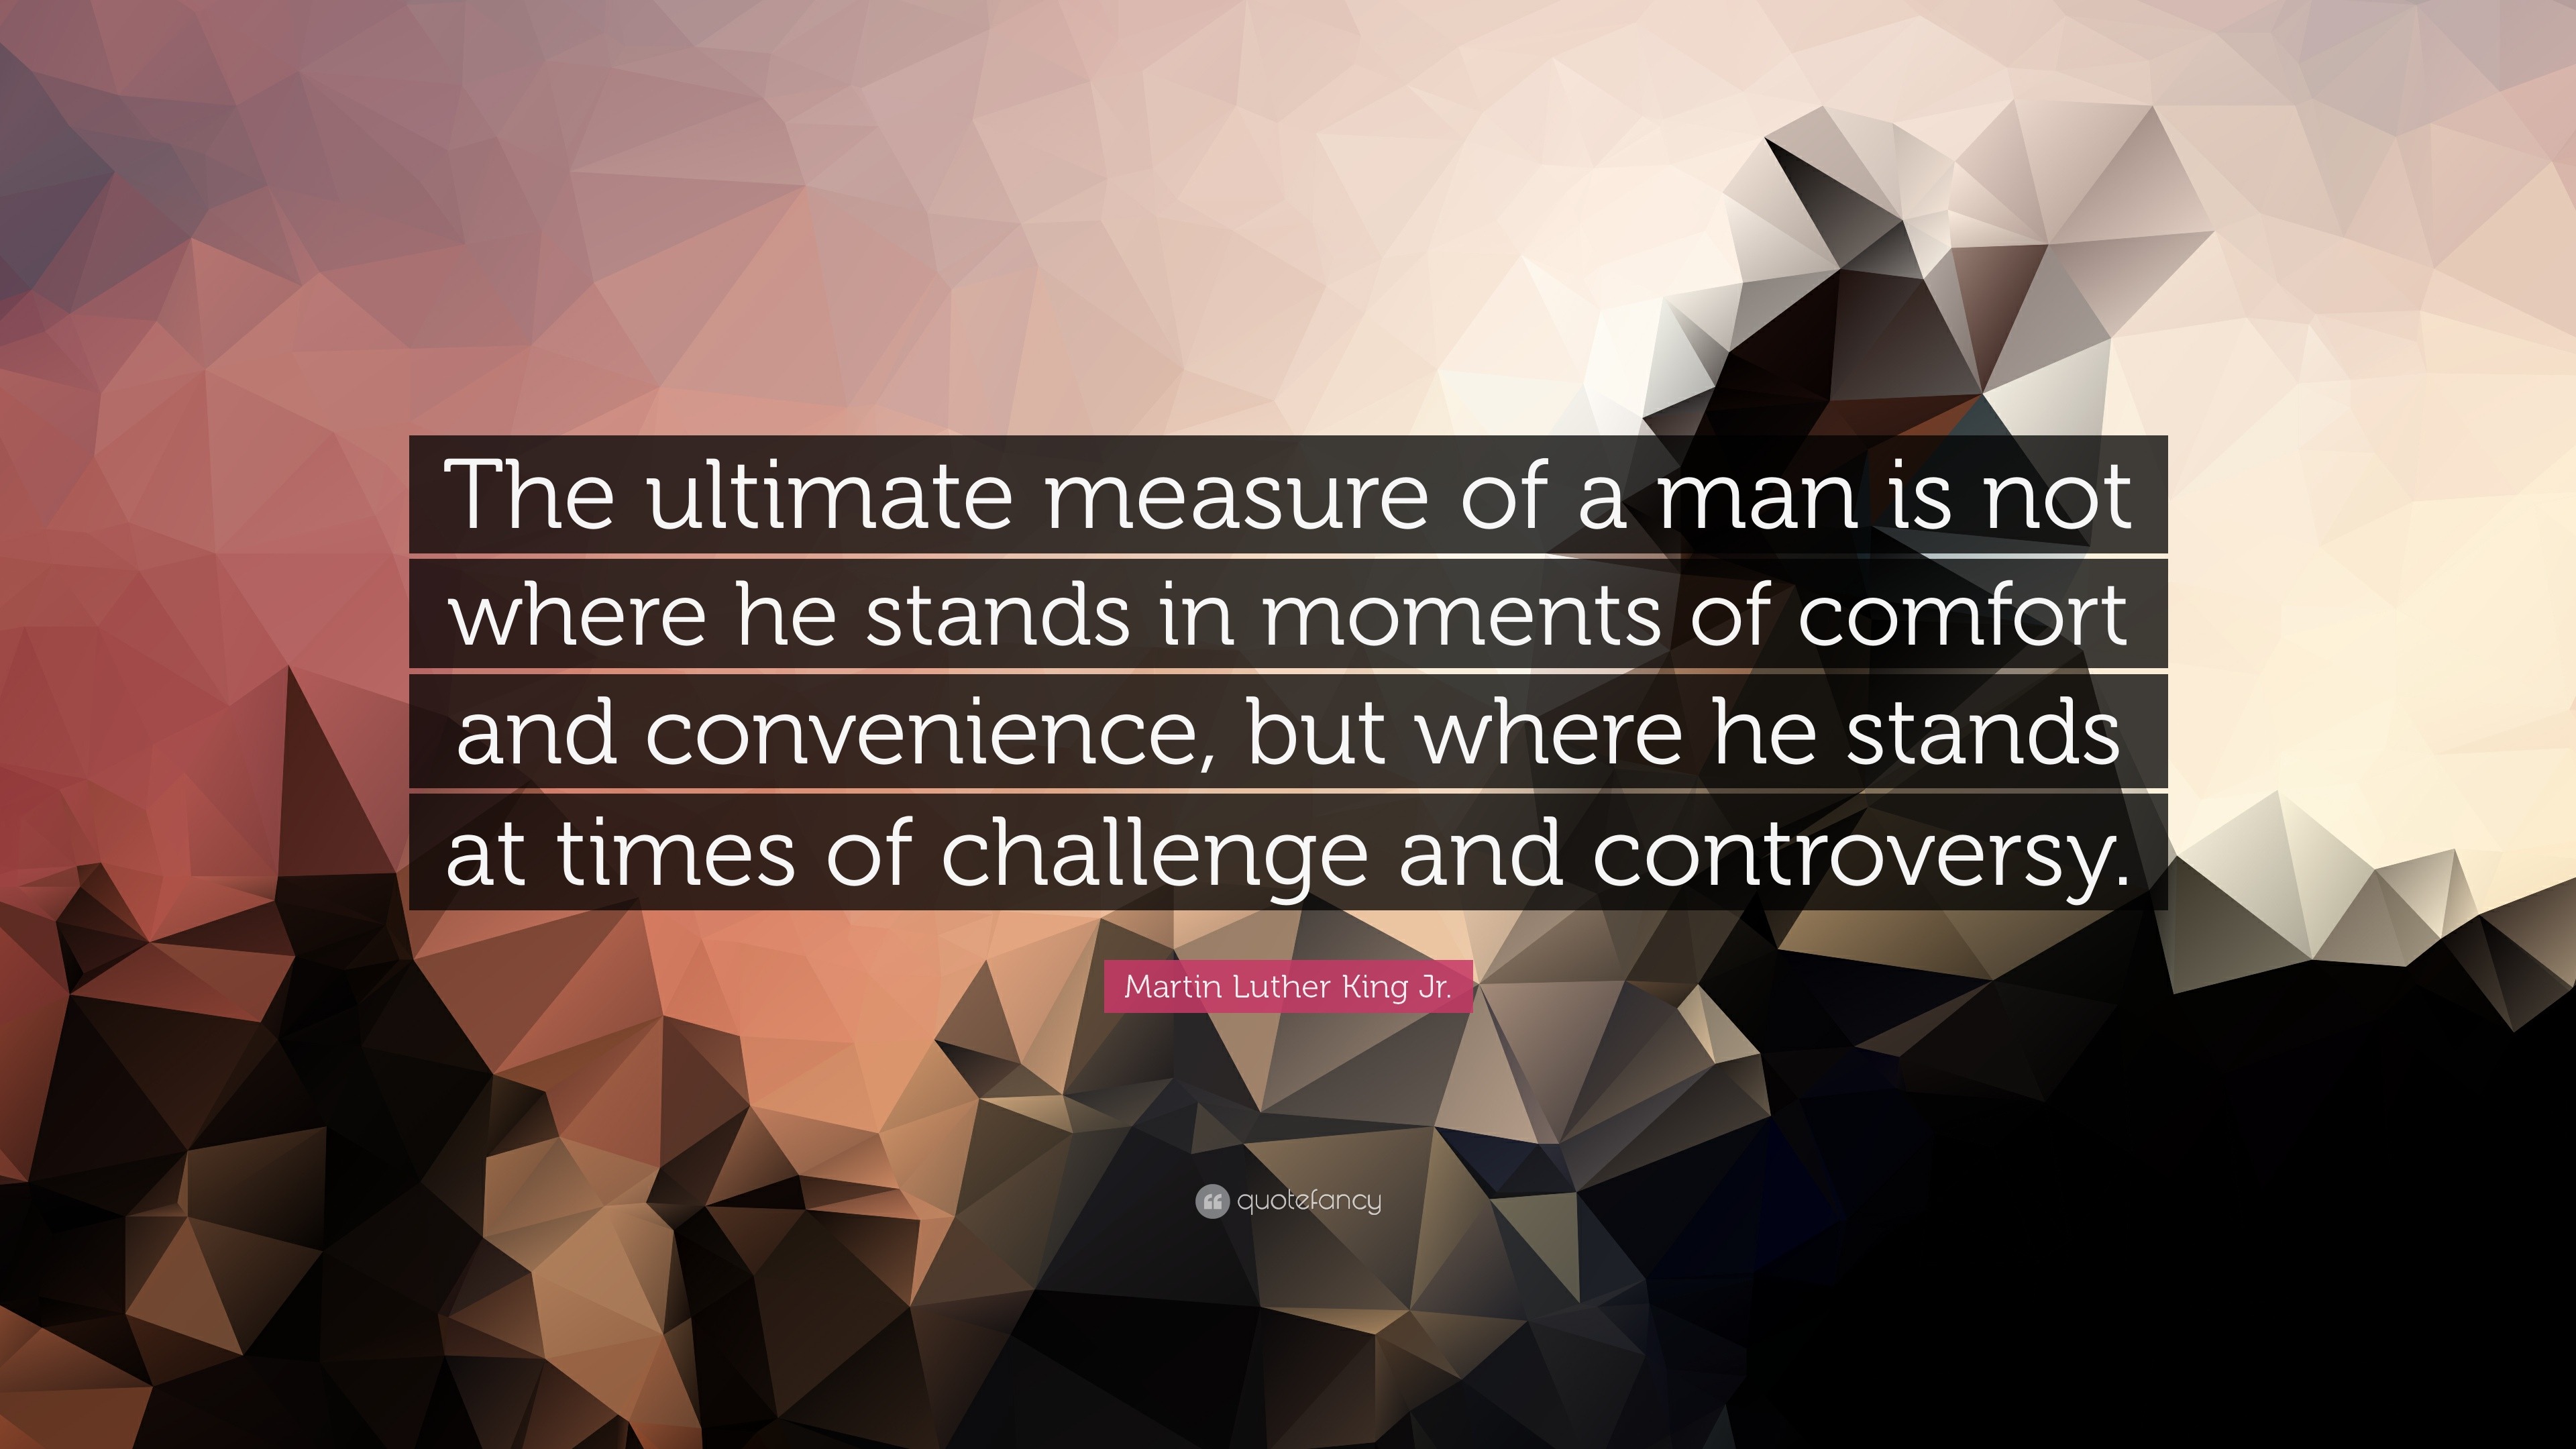 Martin Luther King Jr. Quote: “The ultimate measure of a man is not